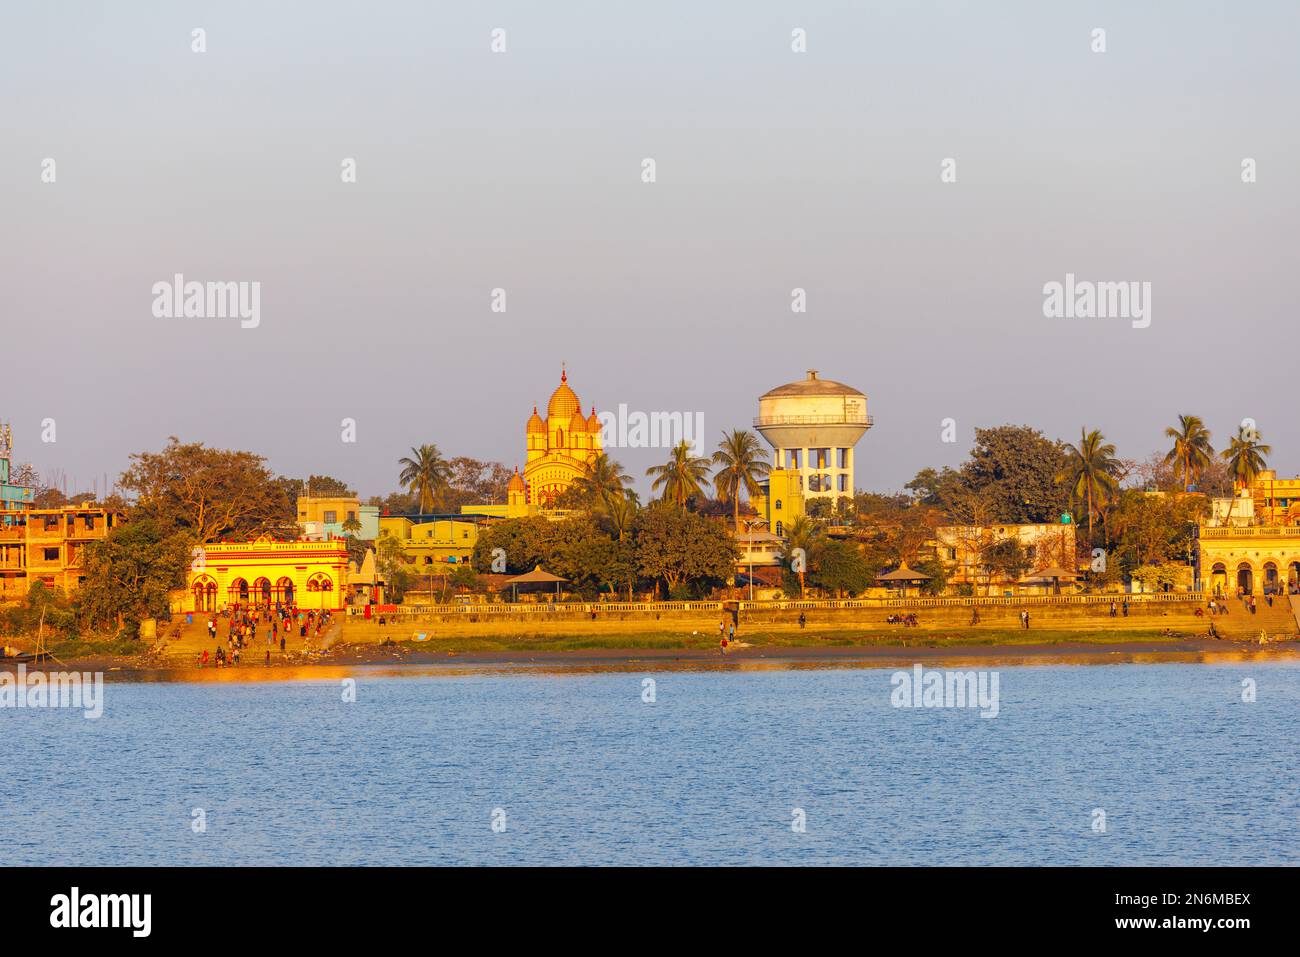 View of Dakshineswar Kali Temple and Dakshineswar Temple Bakultala Ghat on the banks of Hooghly River, Calcutta, West Bengal, India in evening light Stock Photo